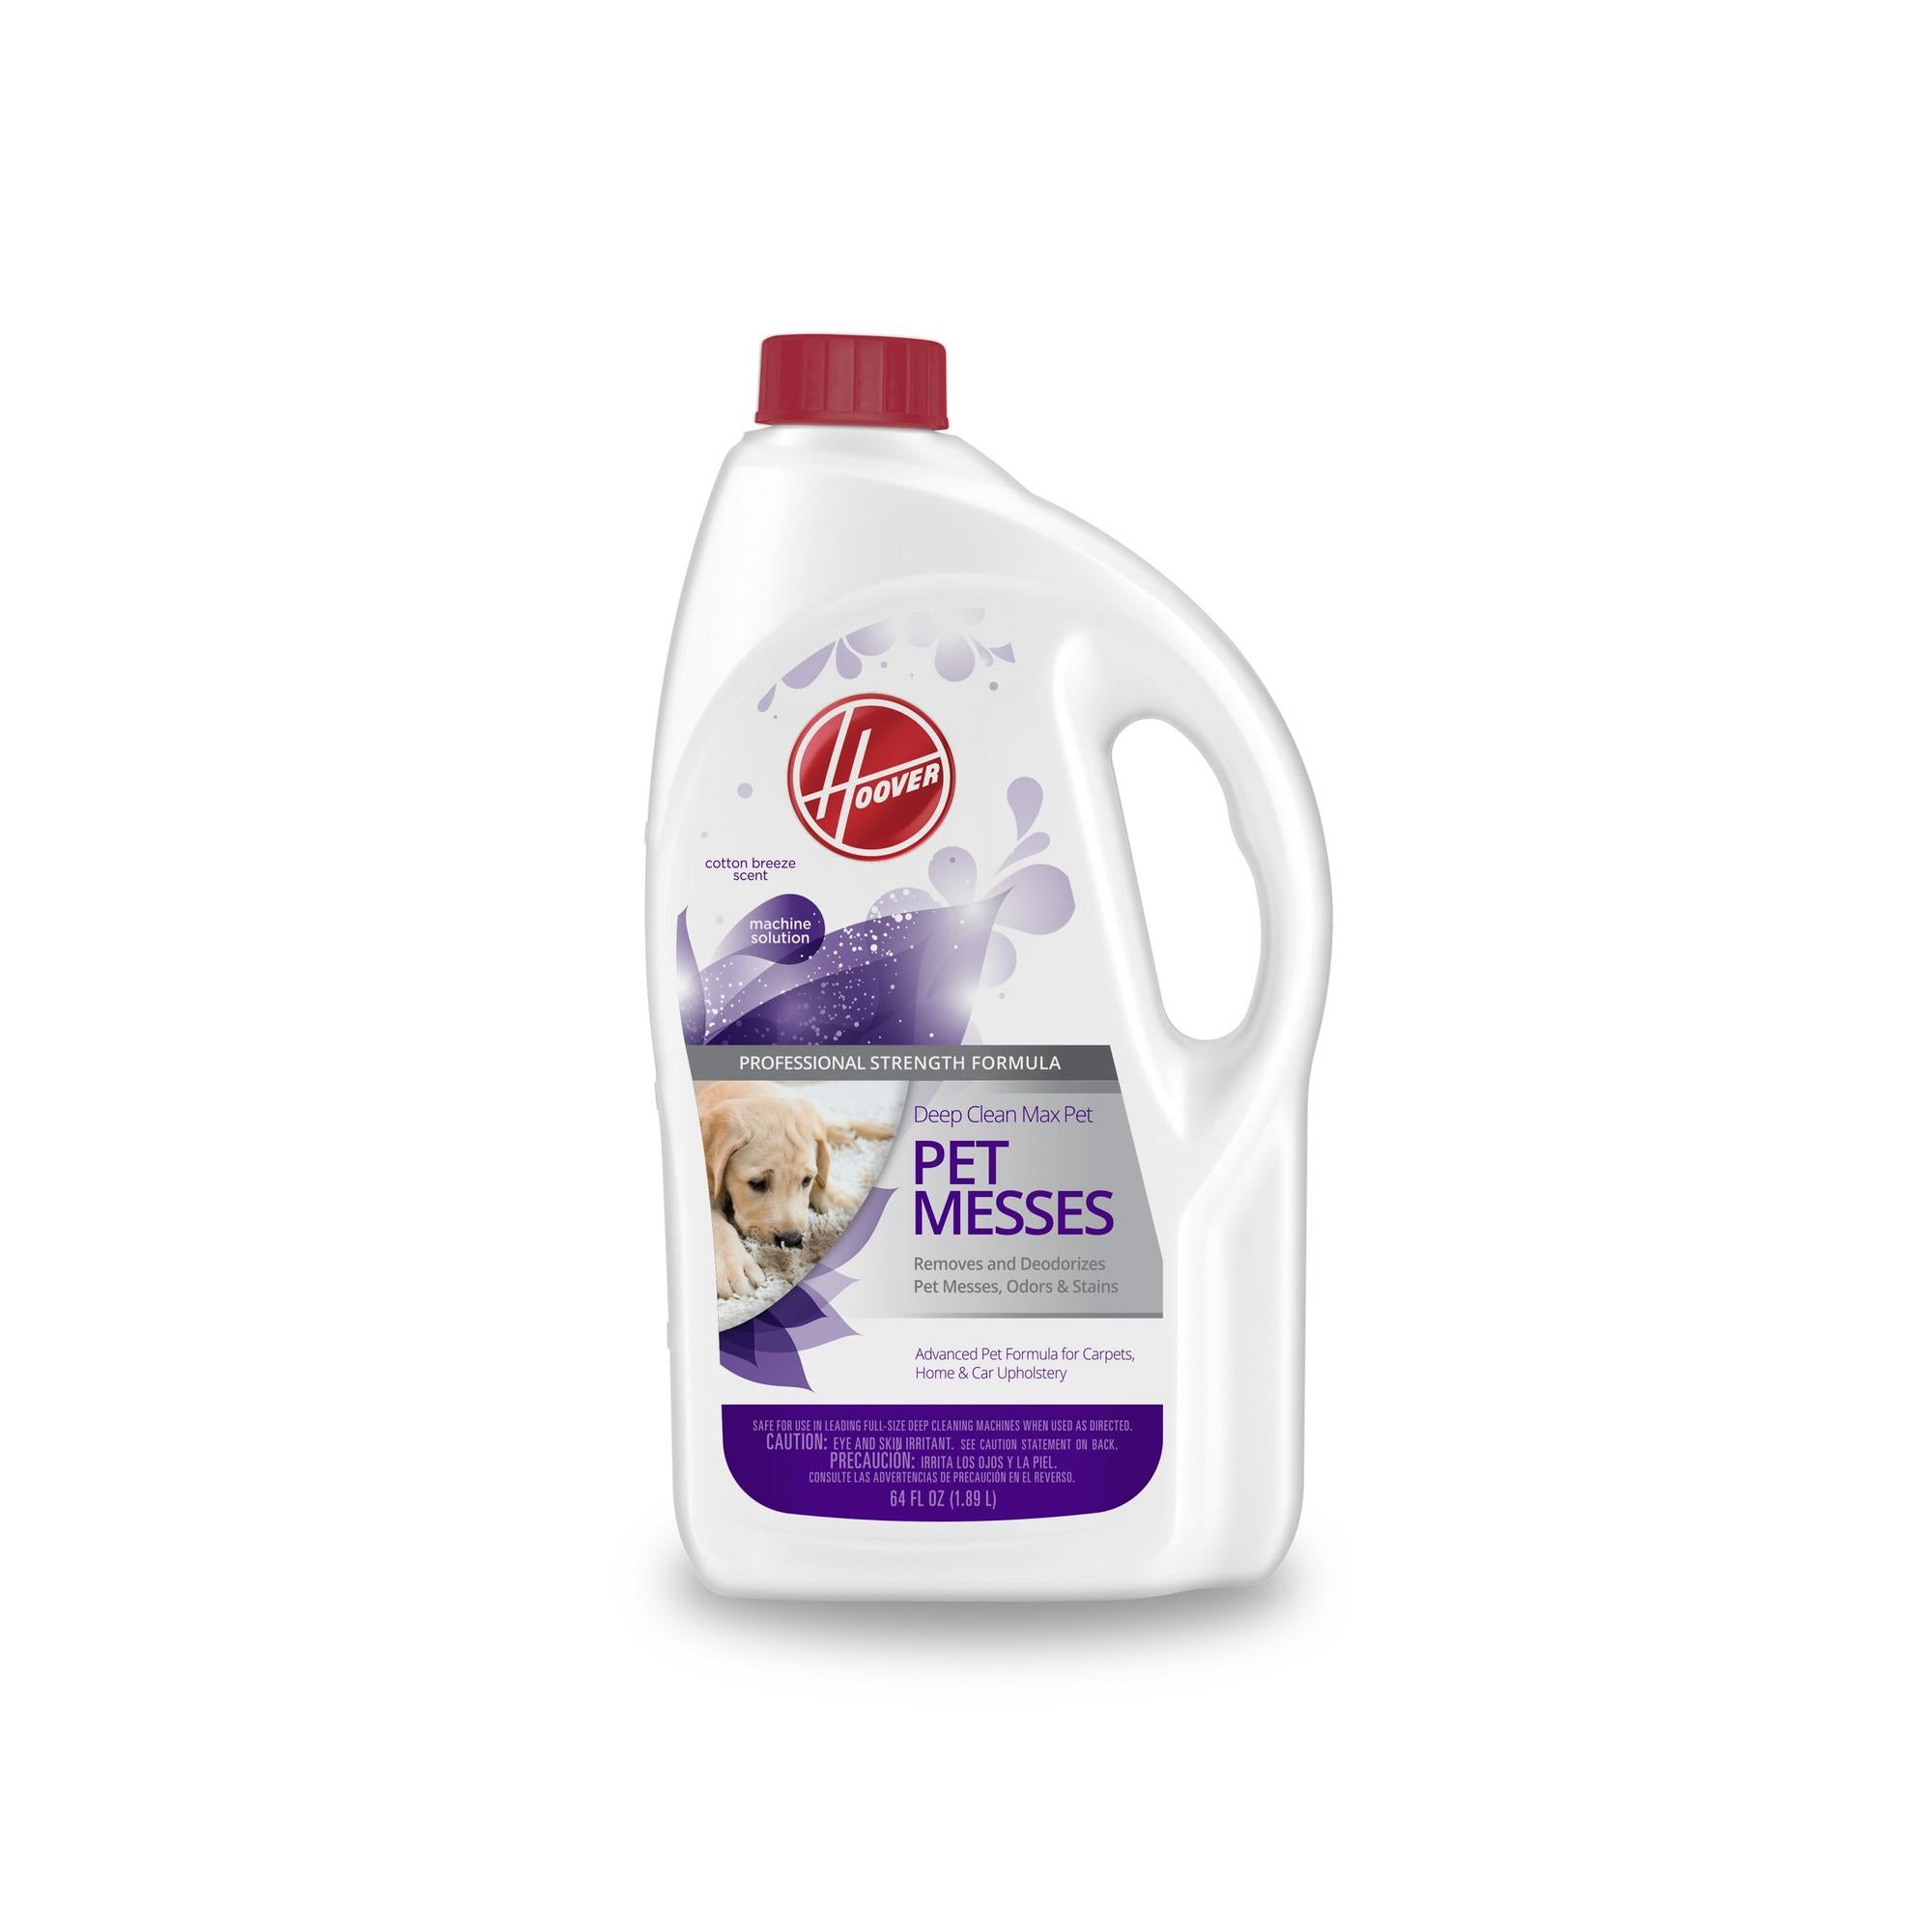 Pet messes Hoover. Carpet Cleaner solution. Professional Carpet Cleaning for Pets. Clean Pet.